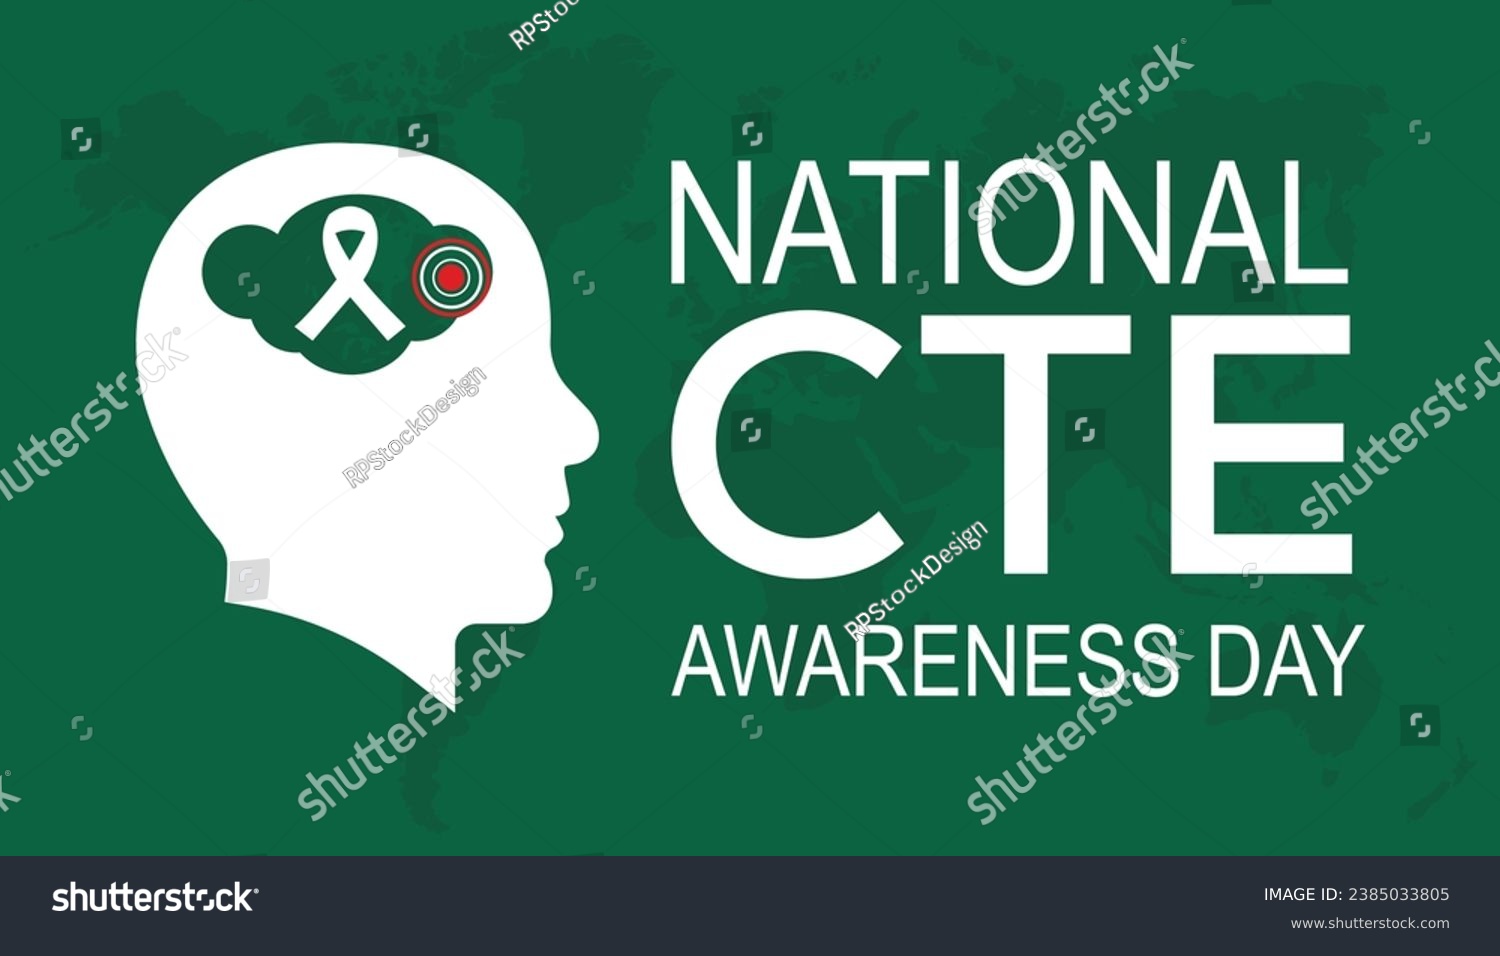 SVG of Vector illustration on the theme of National chronic traumatic encephalopathy (CTE) awareness day observed each year during January.banner, Holiday, poster, card and background design. svg